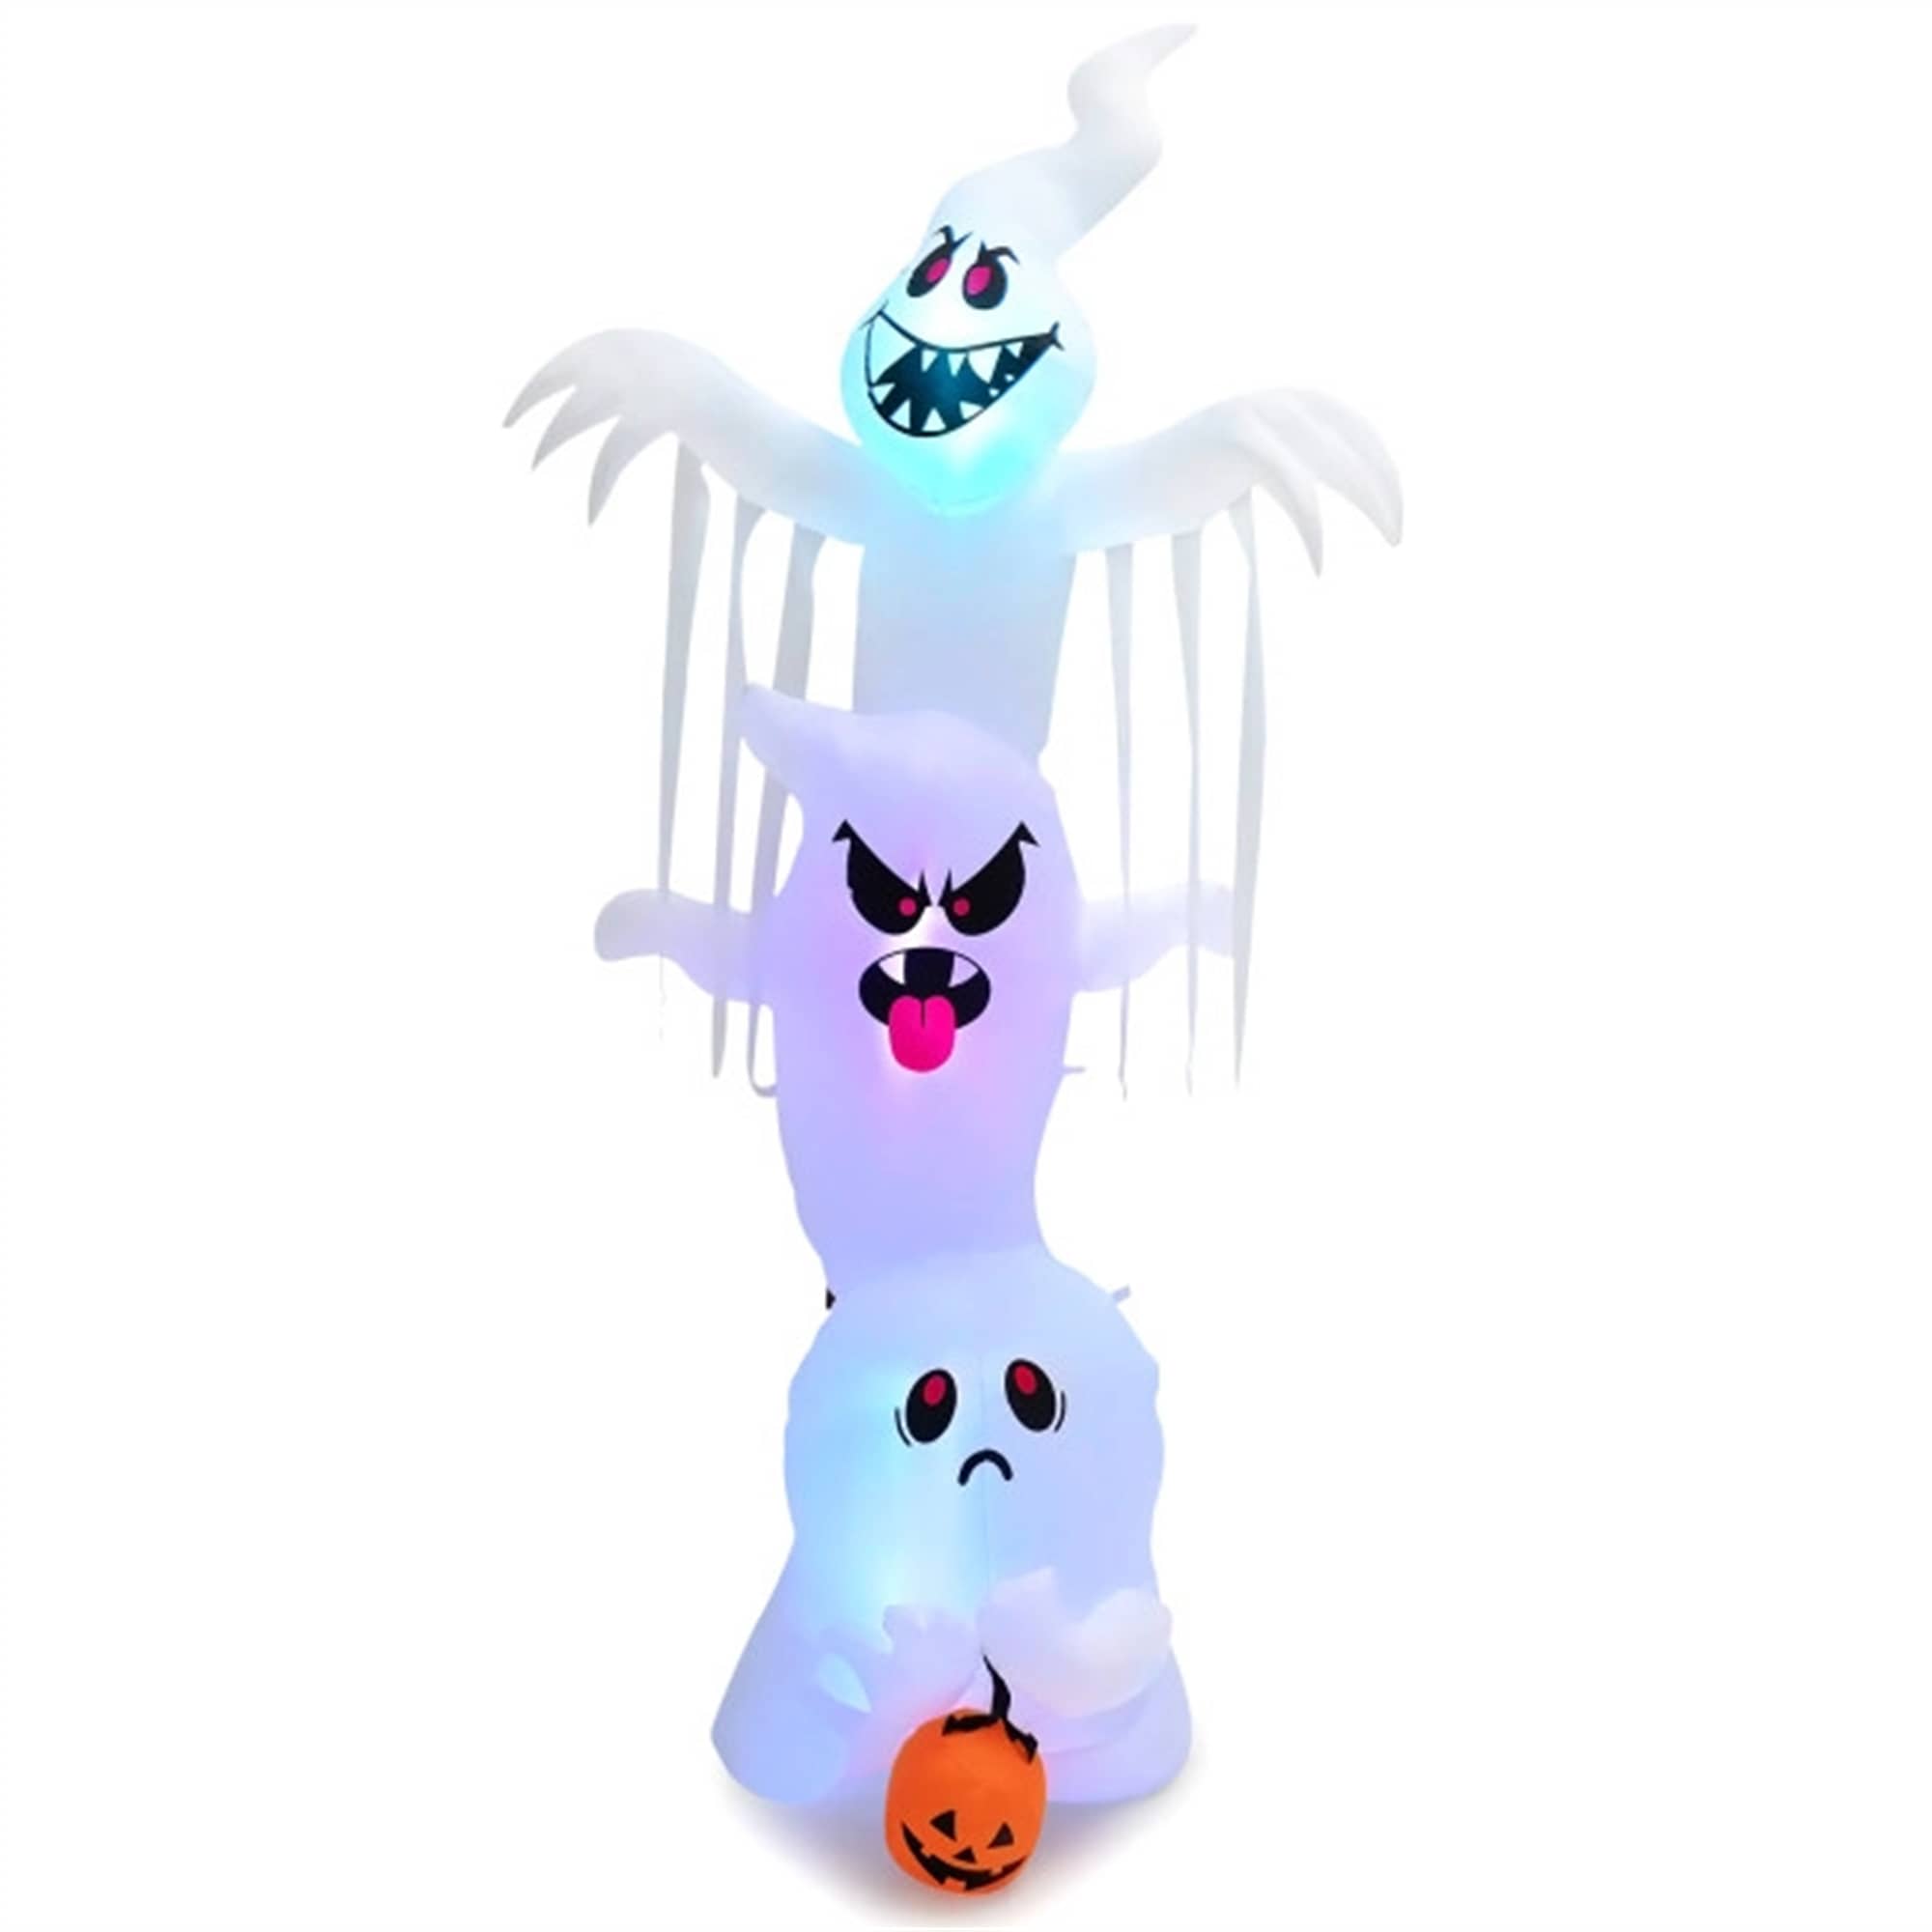 CASAINC 10 Feet Giant Inflatable Halloween Overlap Ghost Decoration with Colorful RGB Lights